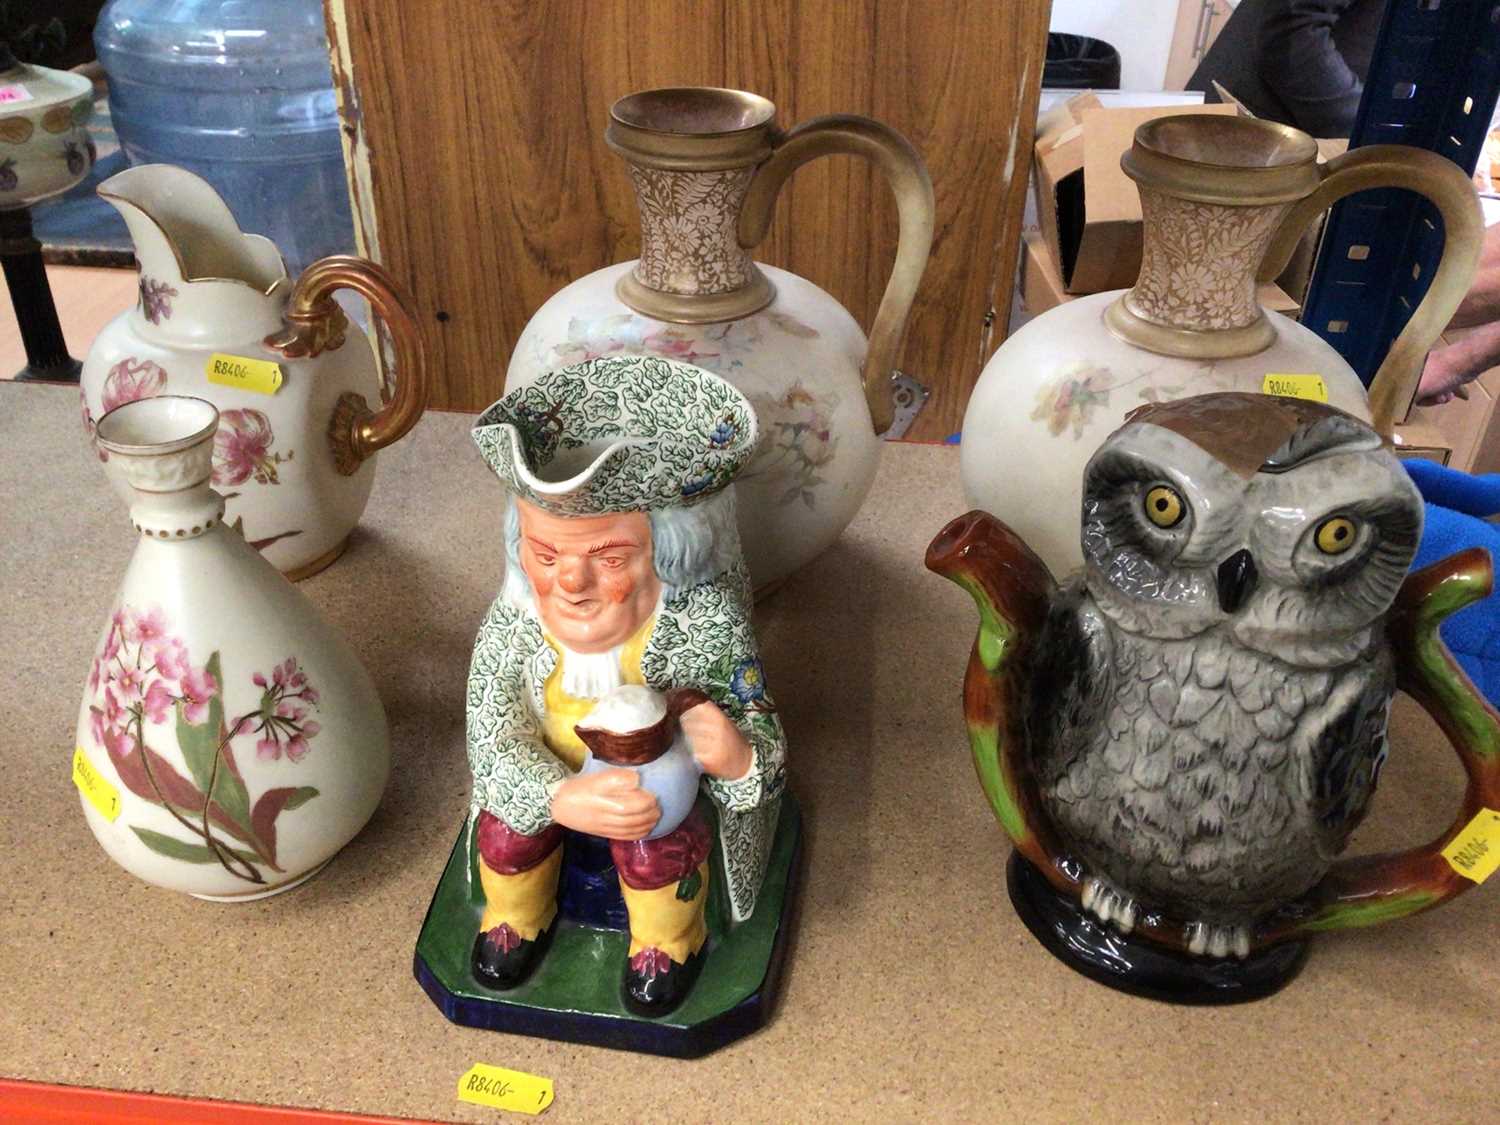 Lot 79 - Late Victorian Royal Worcester porcelain ewer and vase, pair of Edwardian Royal Doulton ewers, Edwardian Copeland Spode Toby jug and a Woods Pottery owl teapot